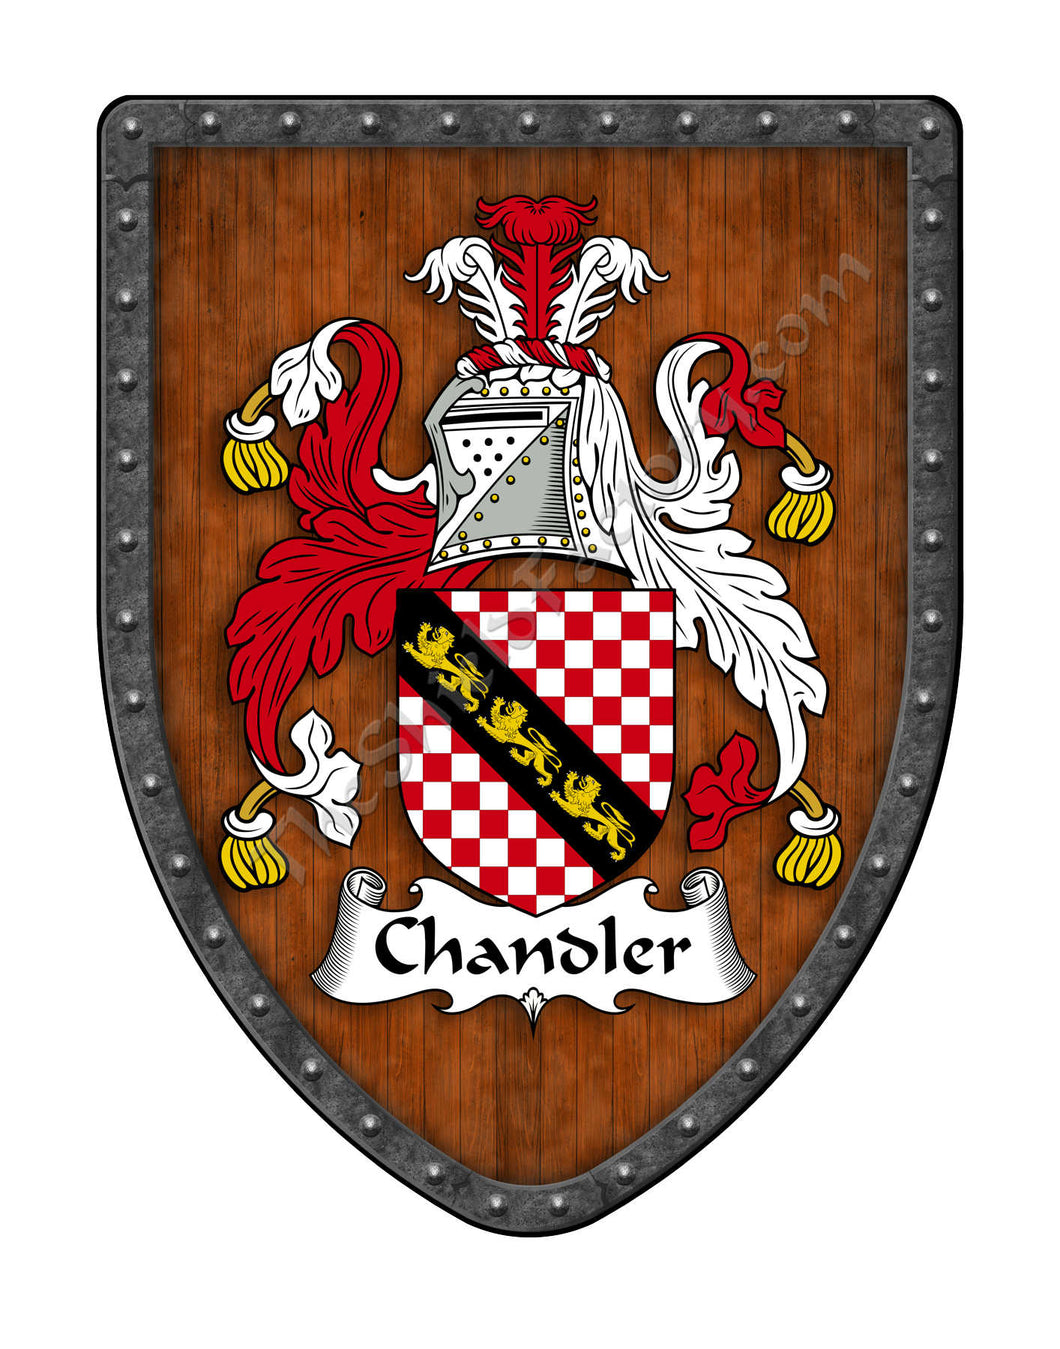 Chandler Coat of Arms Shield Family Crest